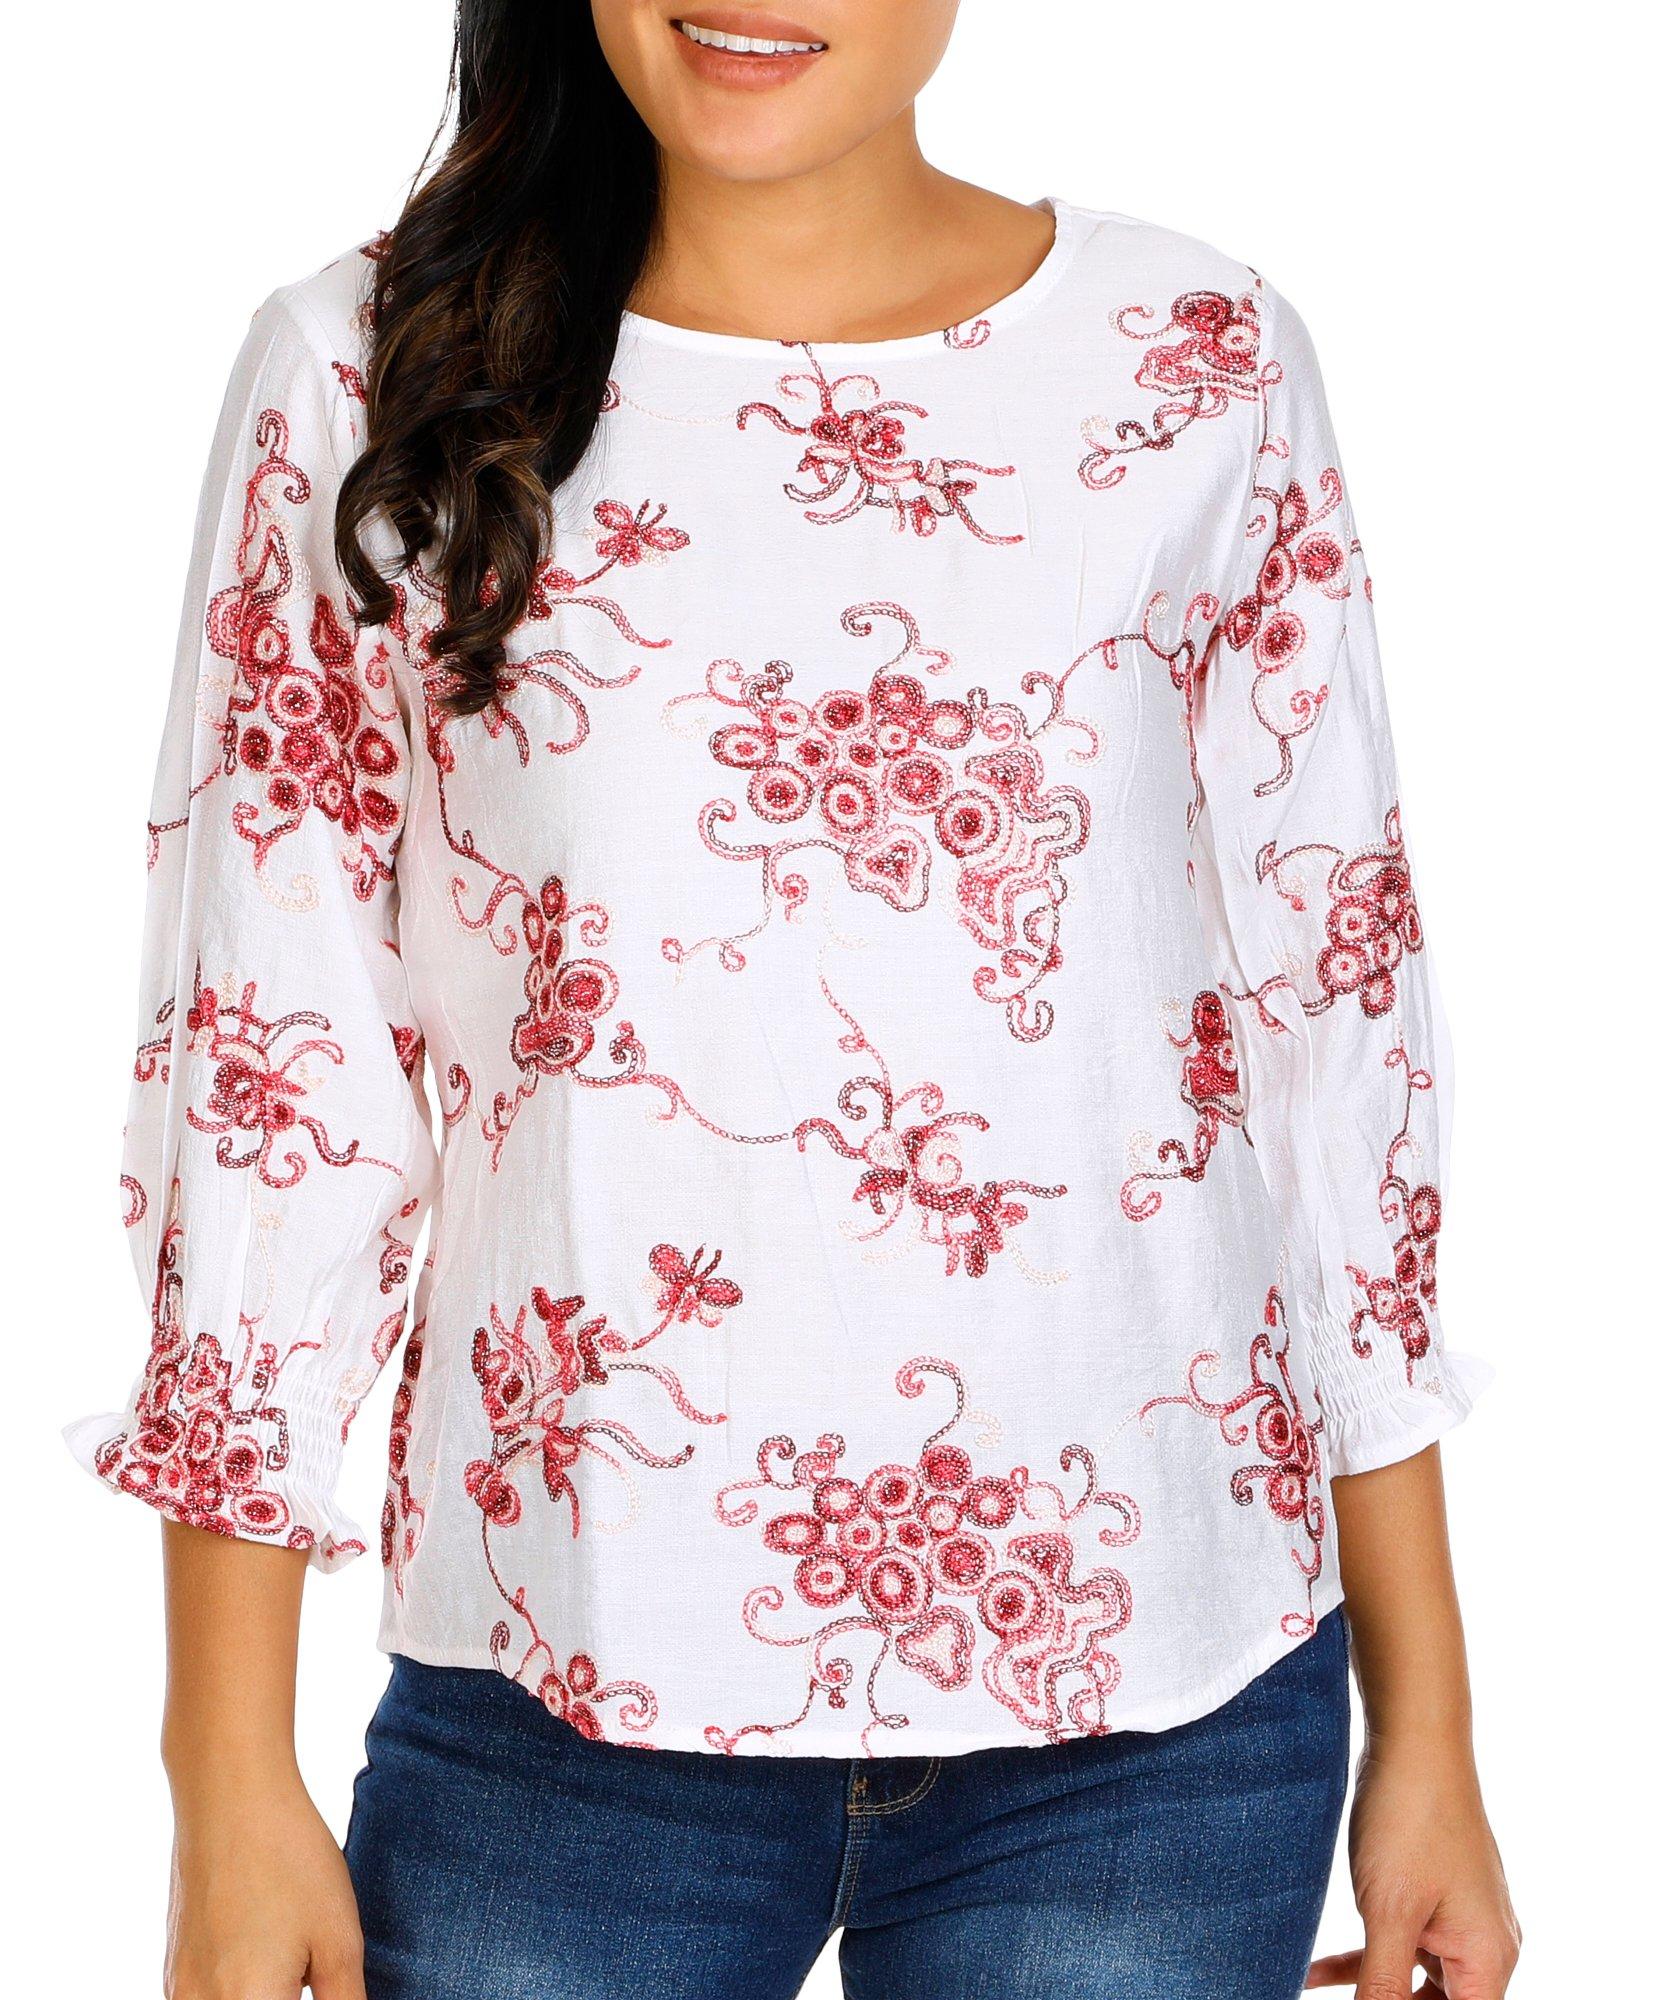 Women's Petite Embroidered Floral Print Top